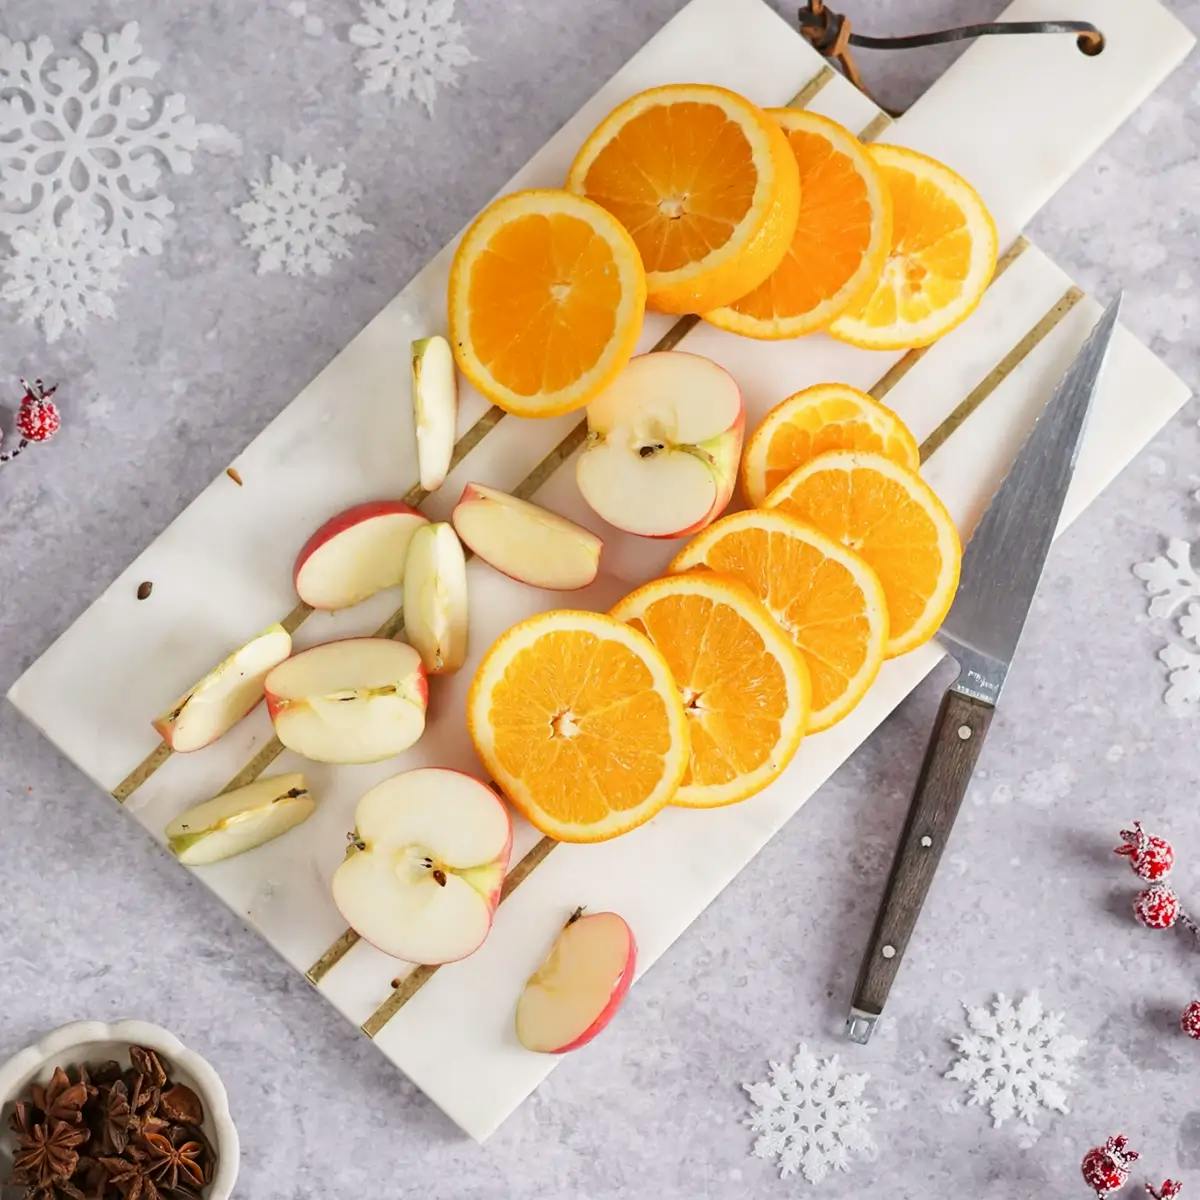 Sliced apples and oranges on a cutting board, part of a holiday punch recipe.